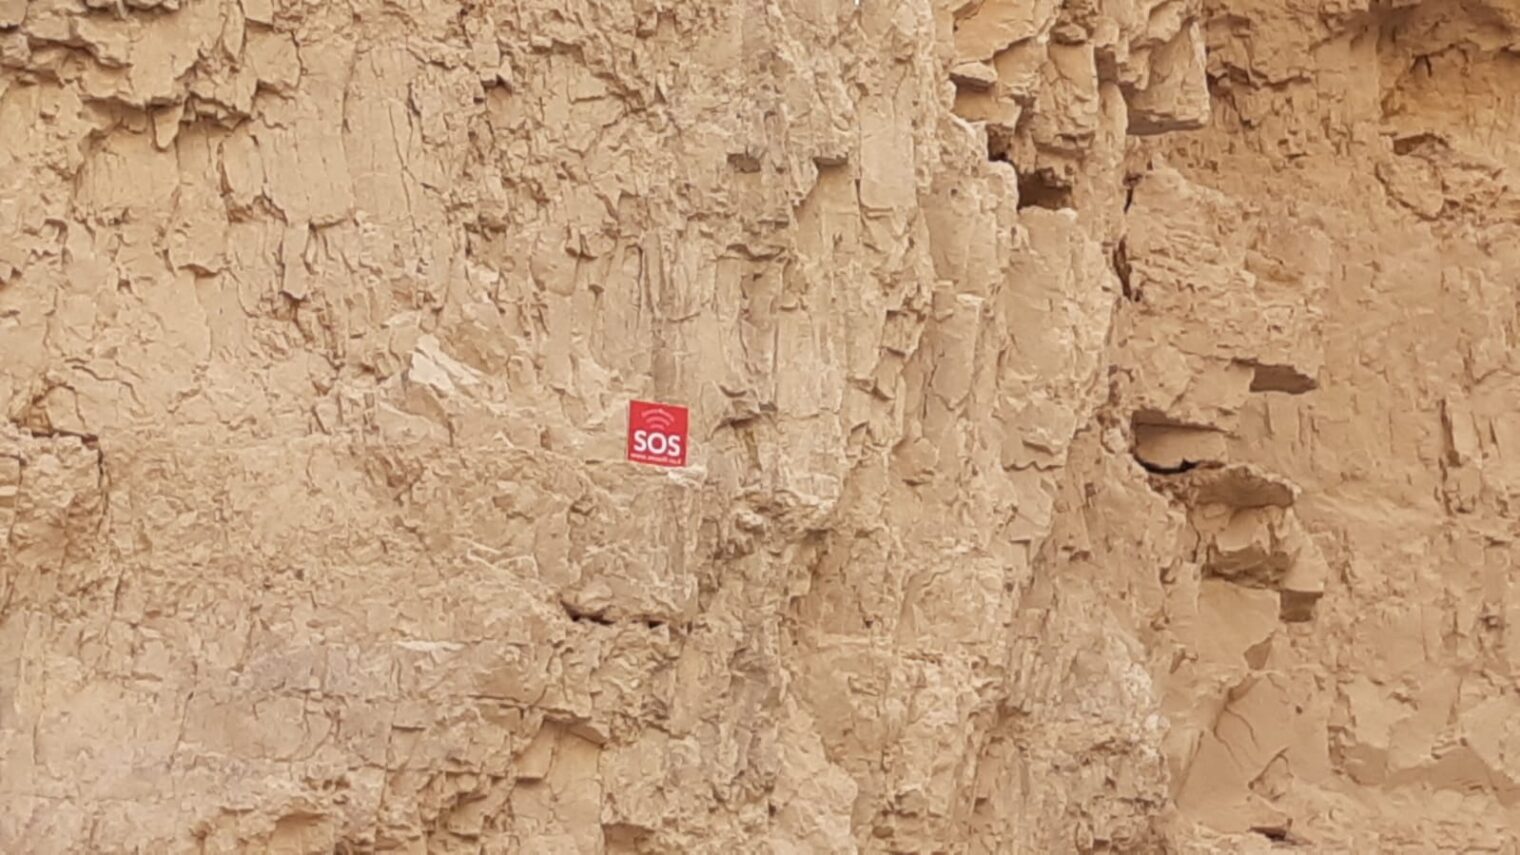 A sign informs hikers at Nahal Og that an SOS WiFi connection is available. Photo courtesy of Bein Hashitin